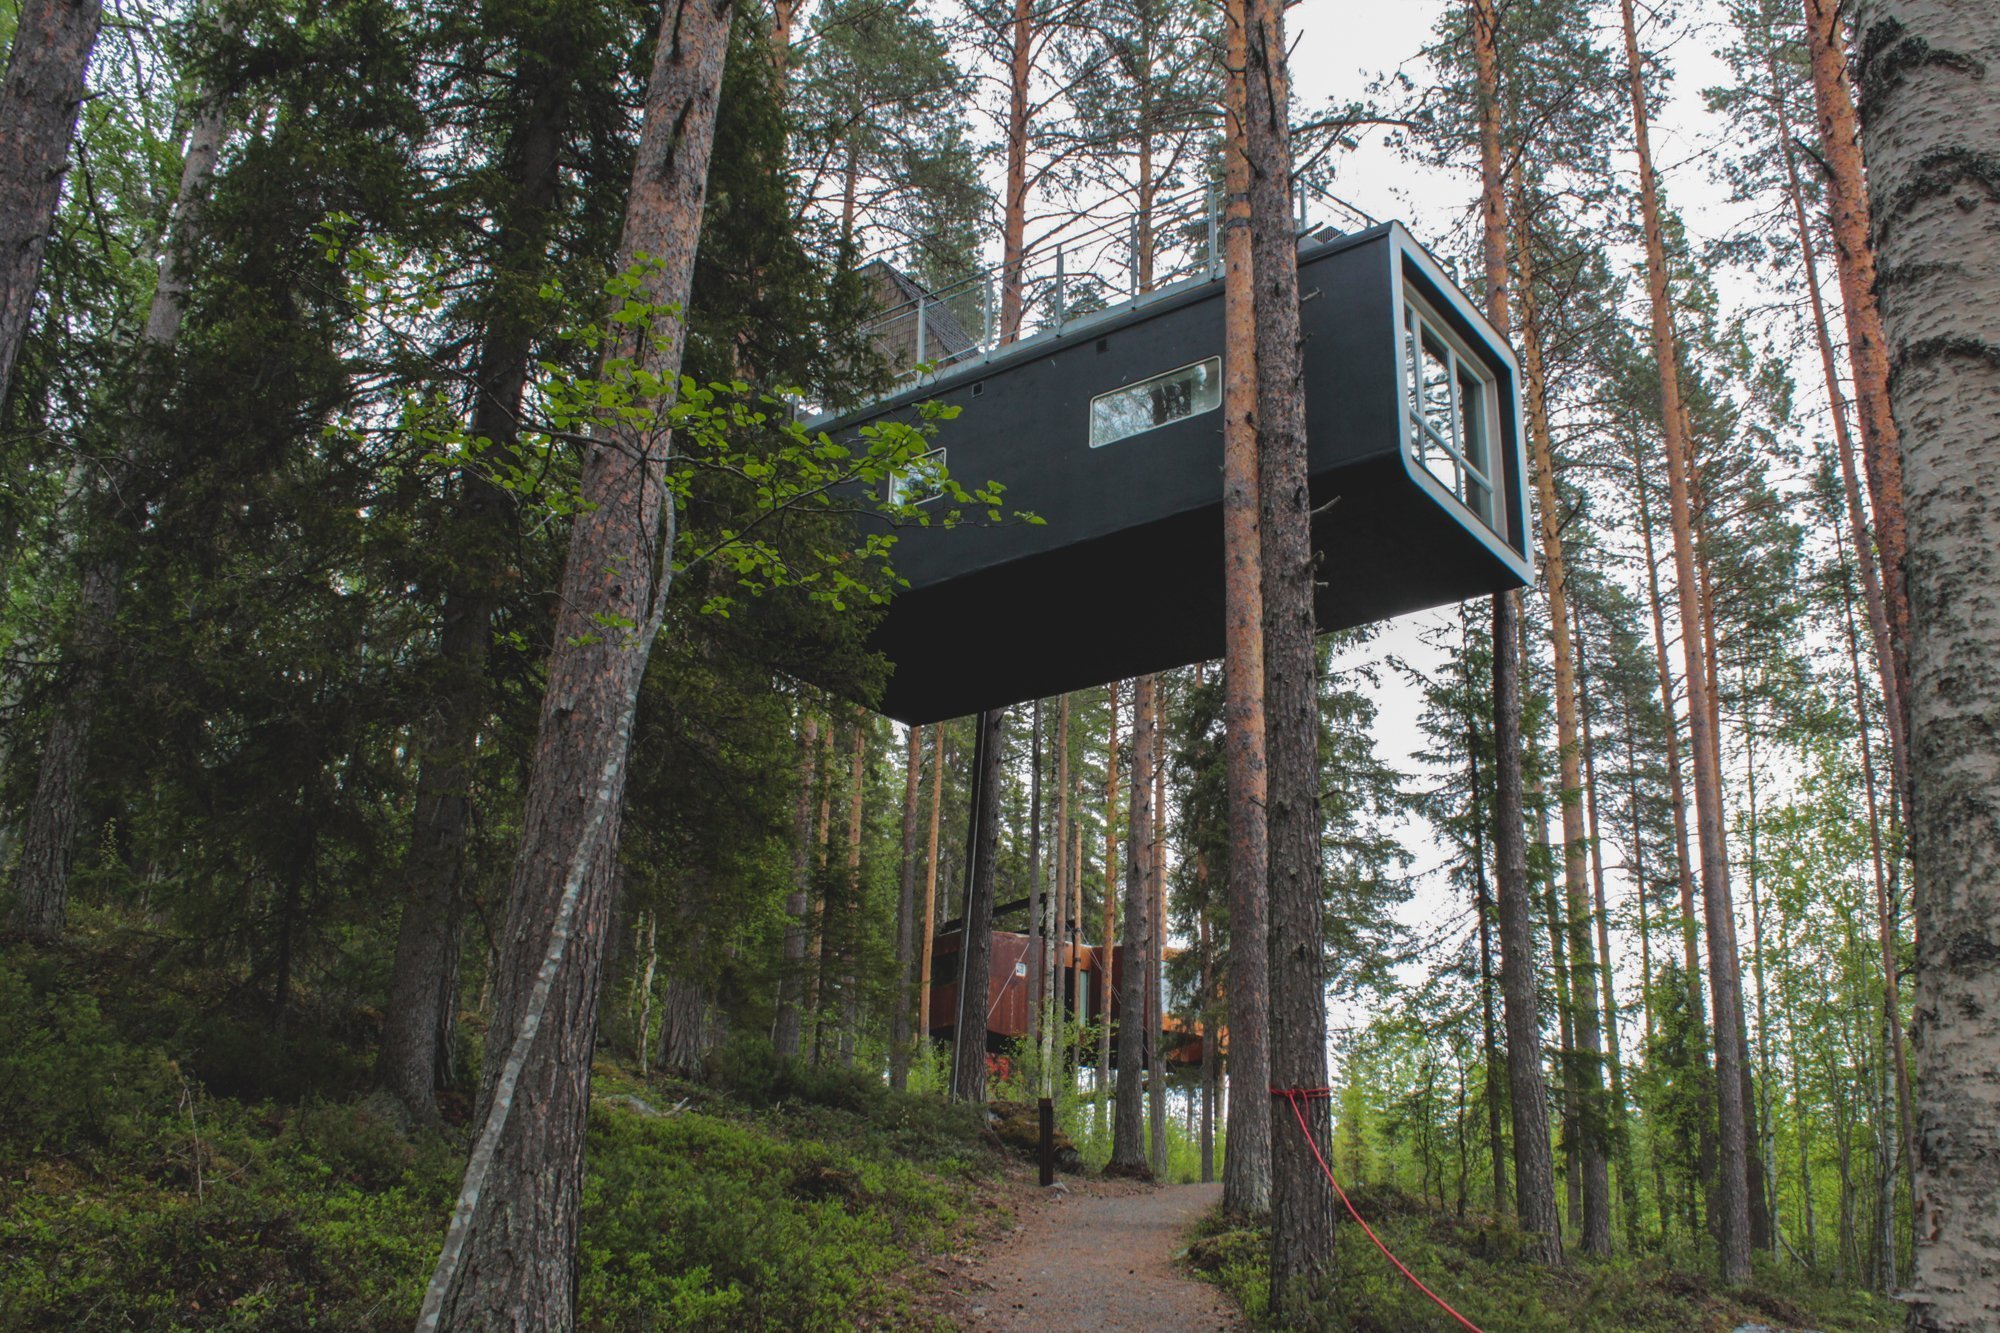 Treehotel review: Sweden's coolest eco hotel 1